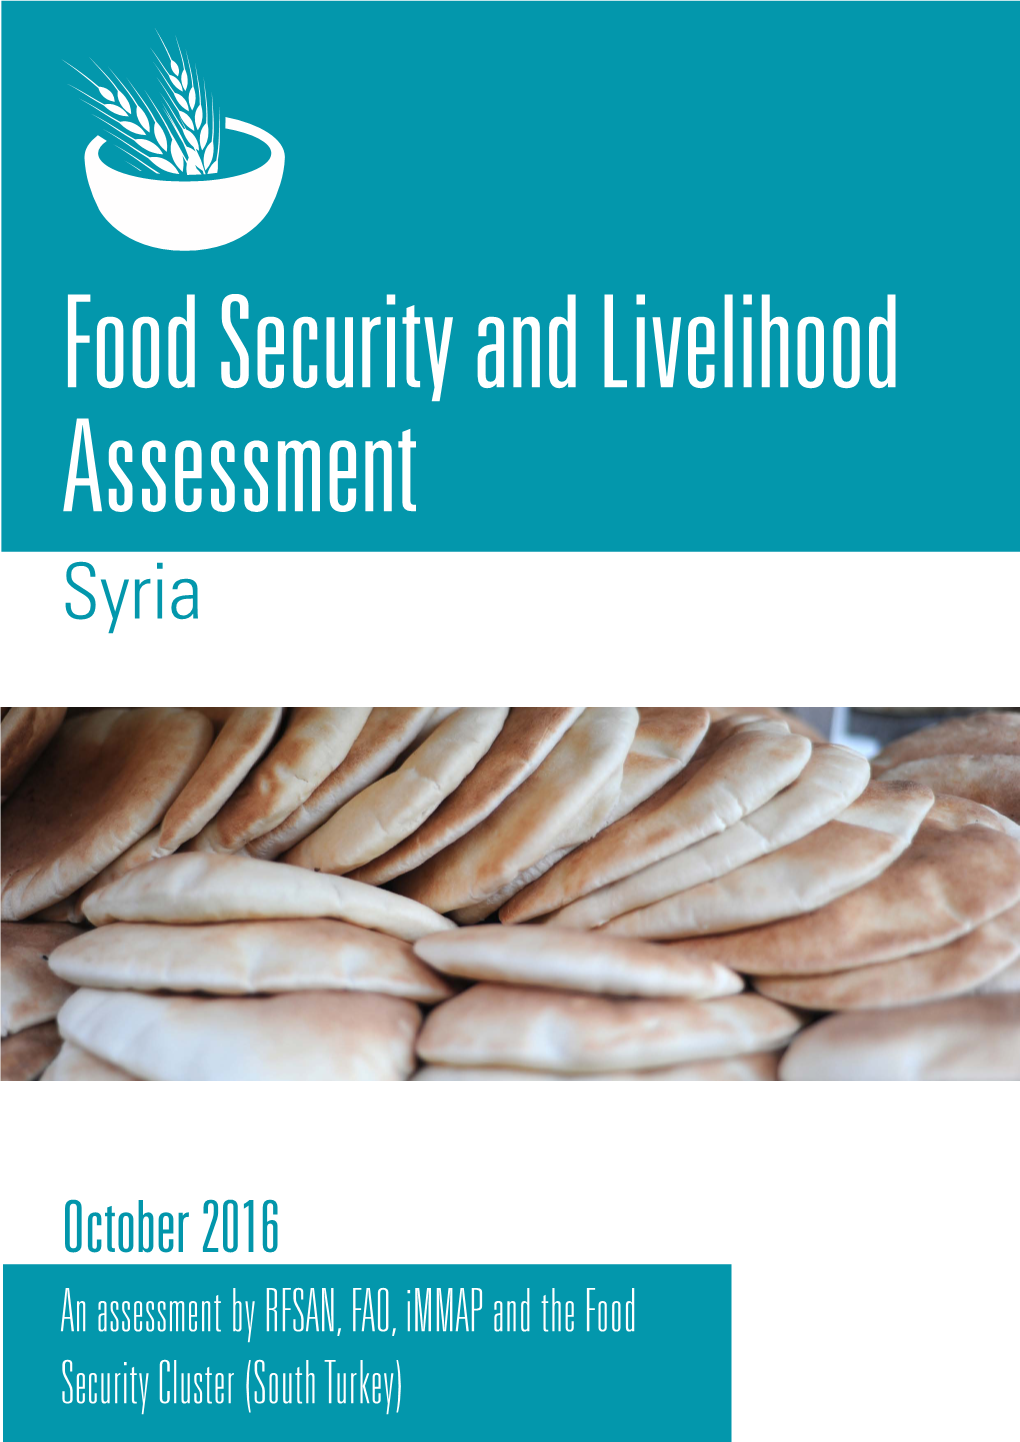 October 2016 an Assessment by RFSAN, FAO, Immap and the Food Security Cluster (South Turkey)